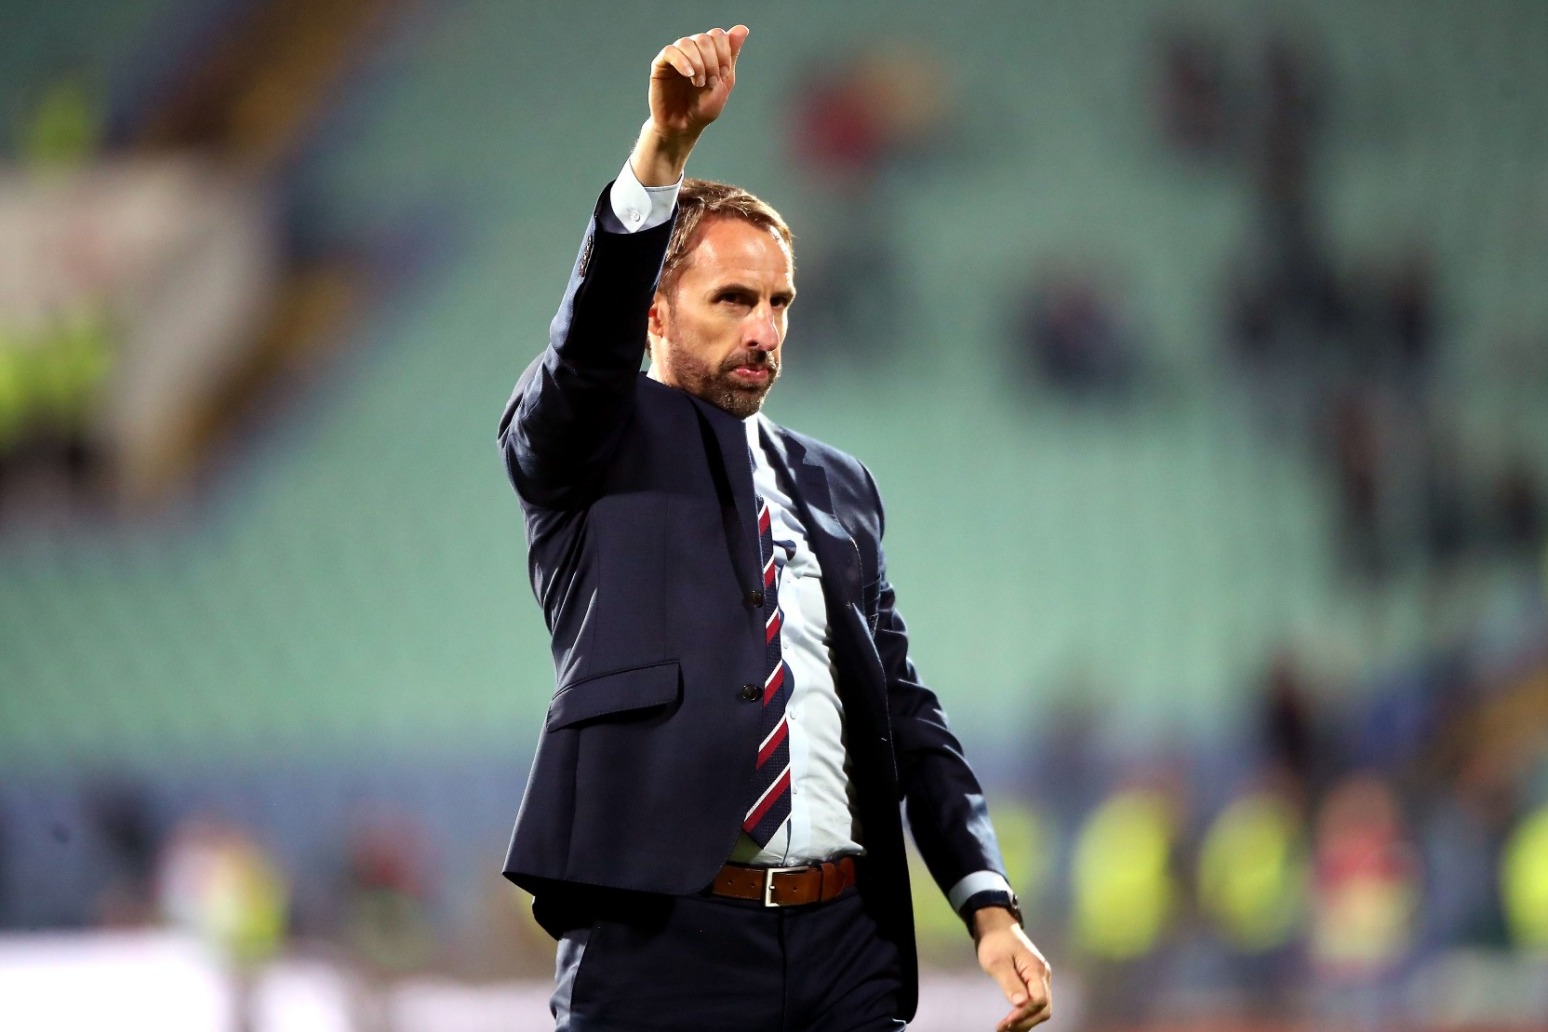 GARETH SOUTHGATE PRAISES ENGLAND\'S \'MAJOR STATEMENT\' IN FACE OF RACIAL ABUSE 